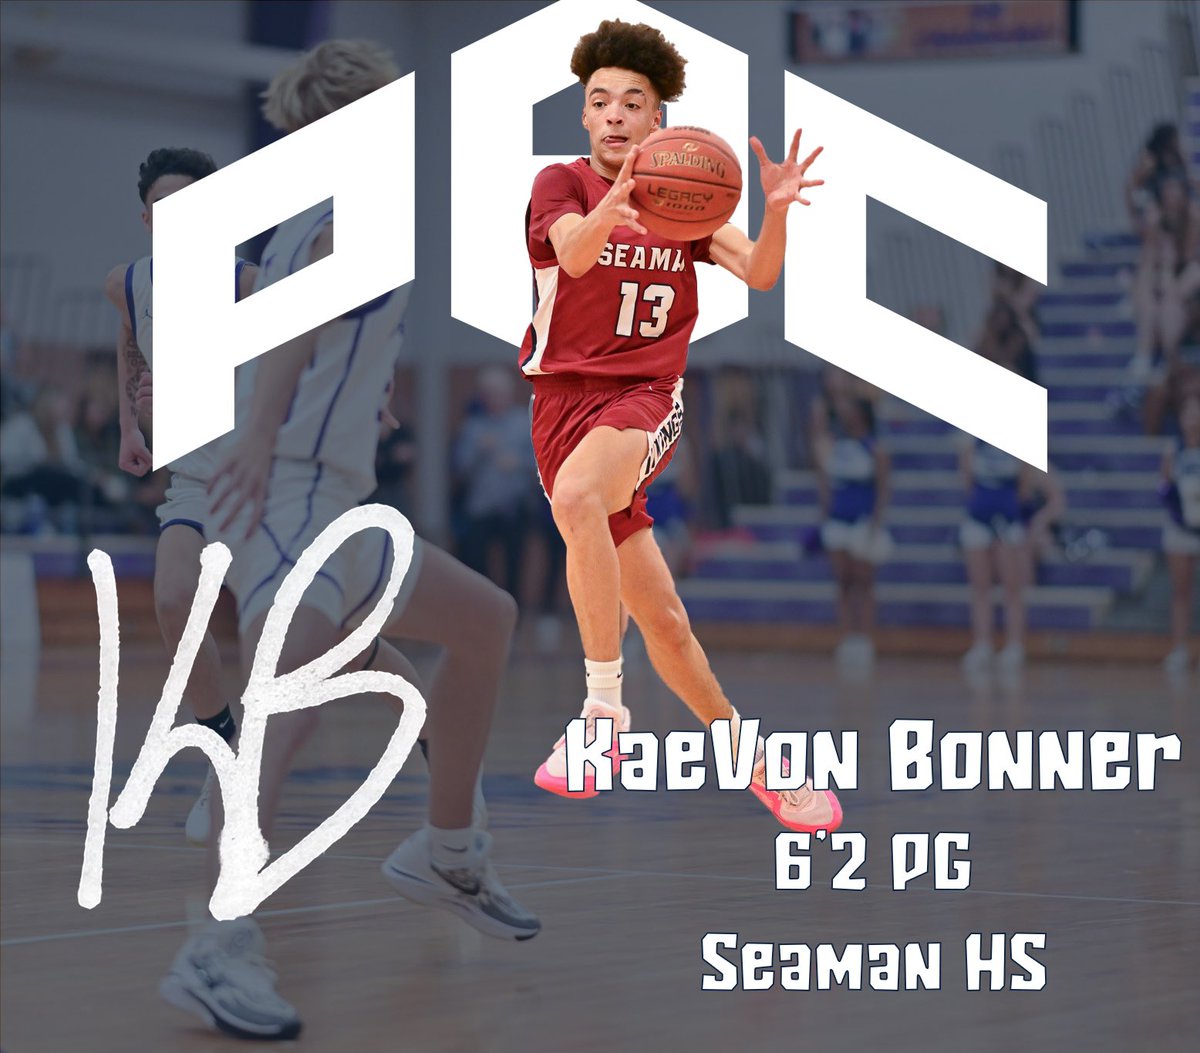 Excited to have our guy KB back leading our 16u group! KB is a 6’2 PG from Seaman HS! This year he averaged 16 ppg and was 1st team all conference! KB is a 3 level scorer with great court sense and plays the game at a high level! Big year ahead! @BonnerKaevon33 | #thePAC 🐺